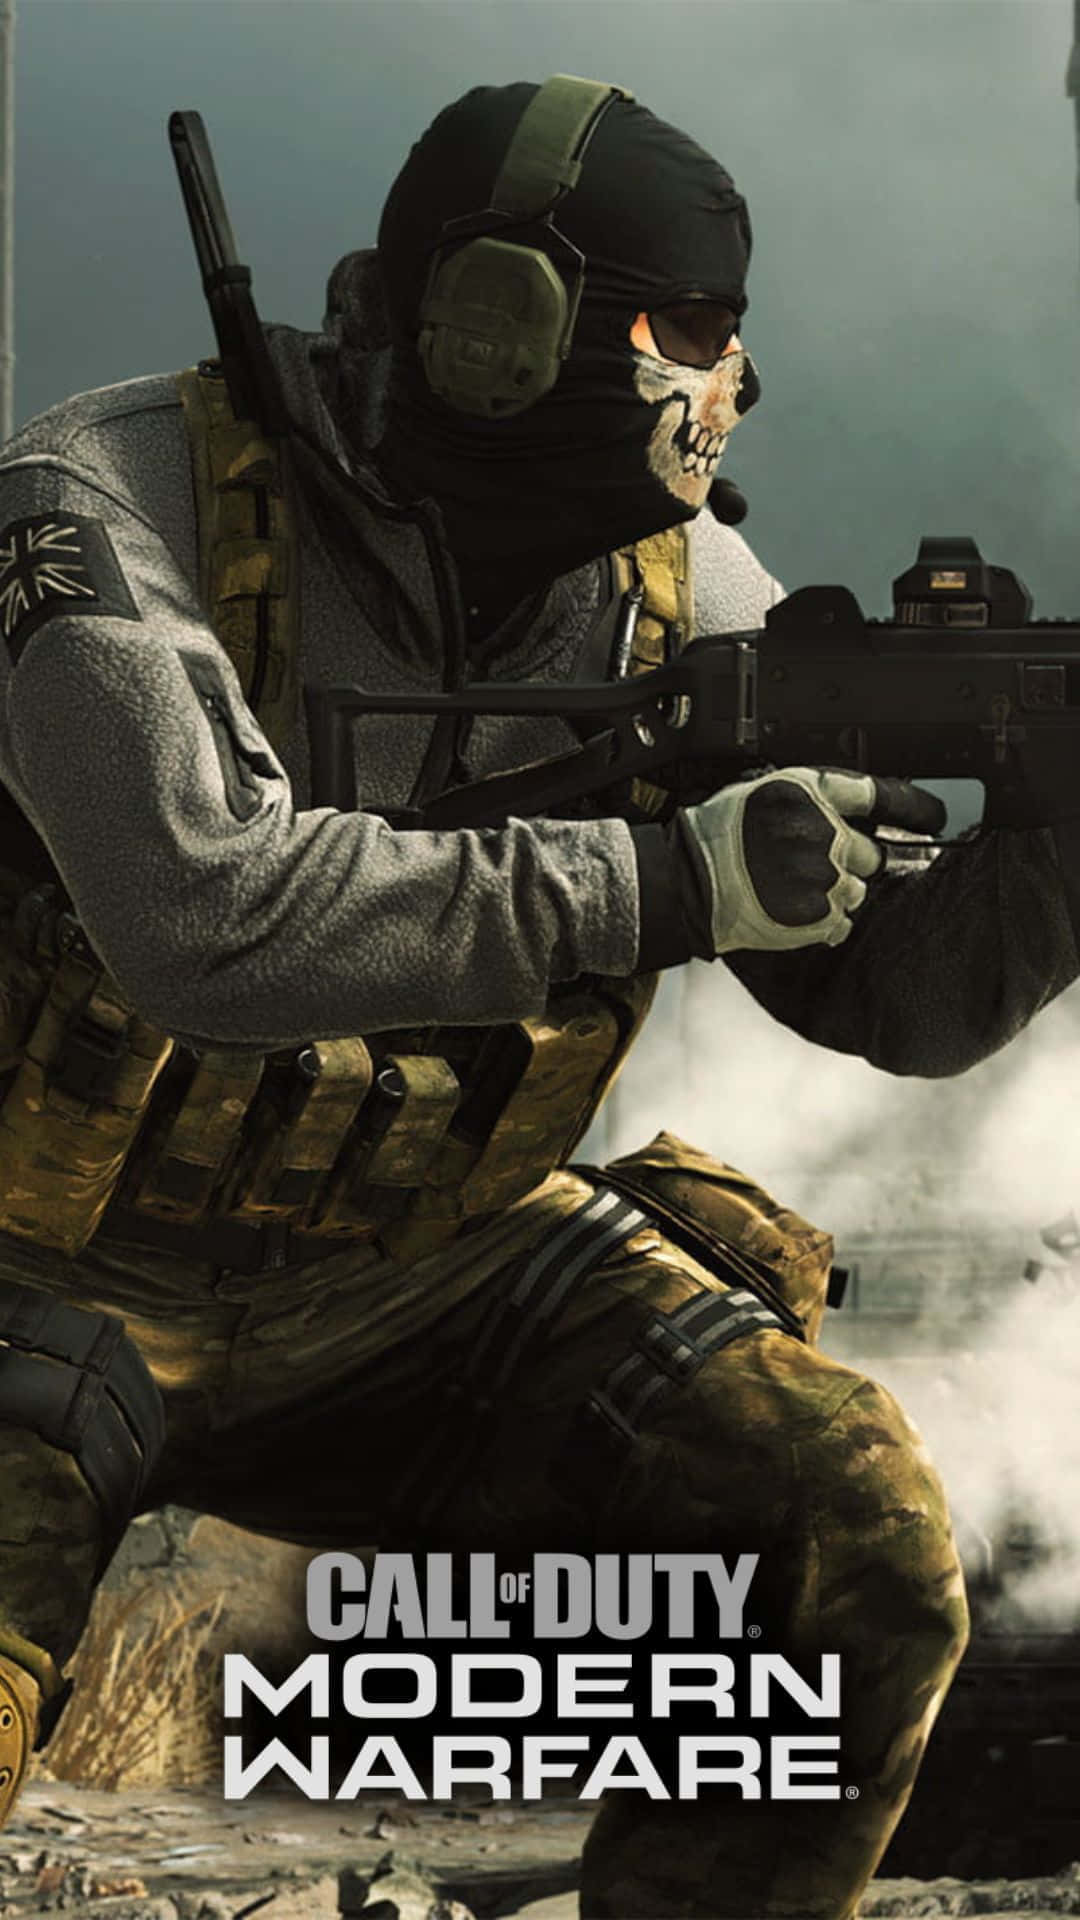 Dive into the heart-pounding, action-packed world of Call of Duty Mobile!